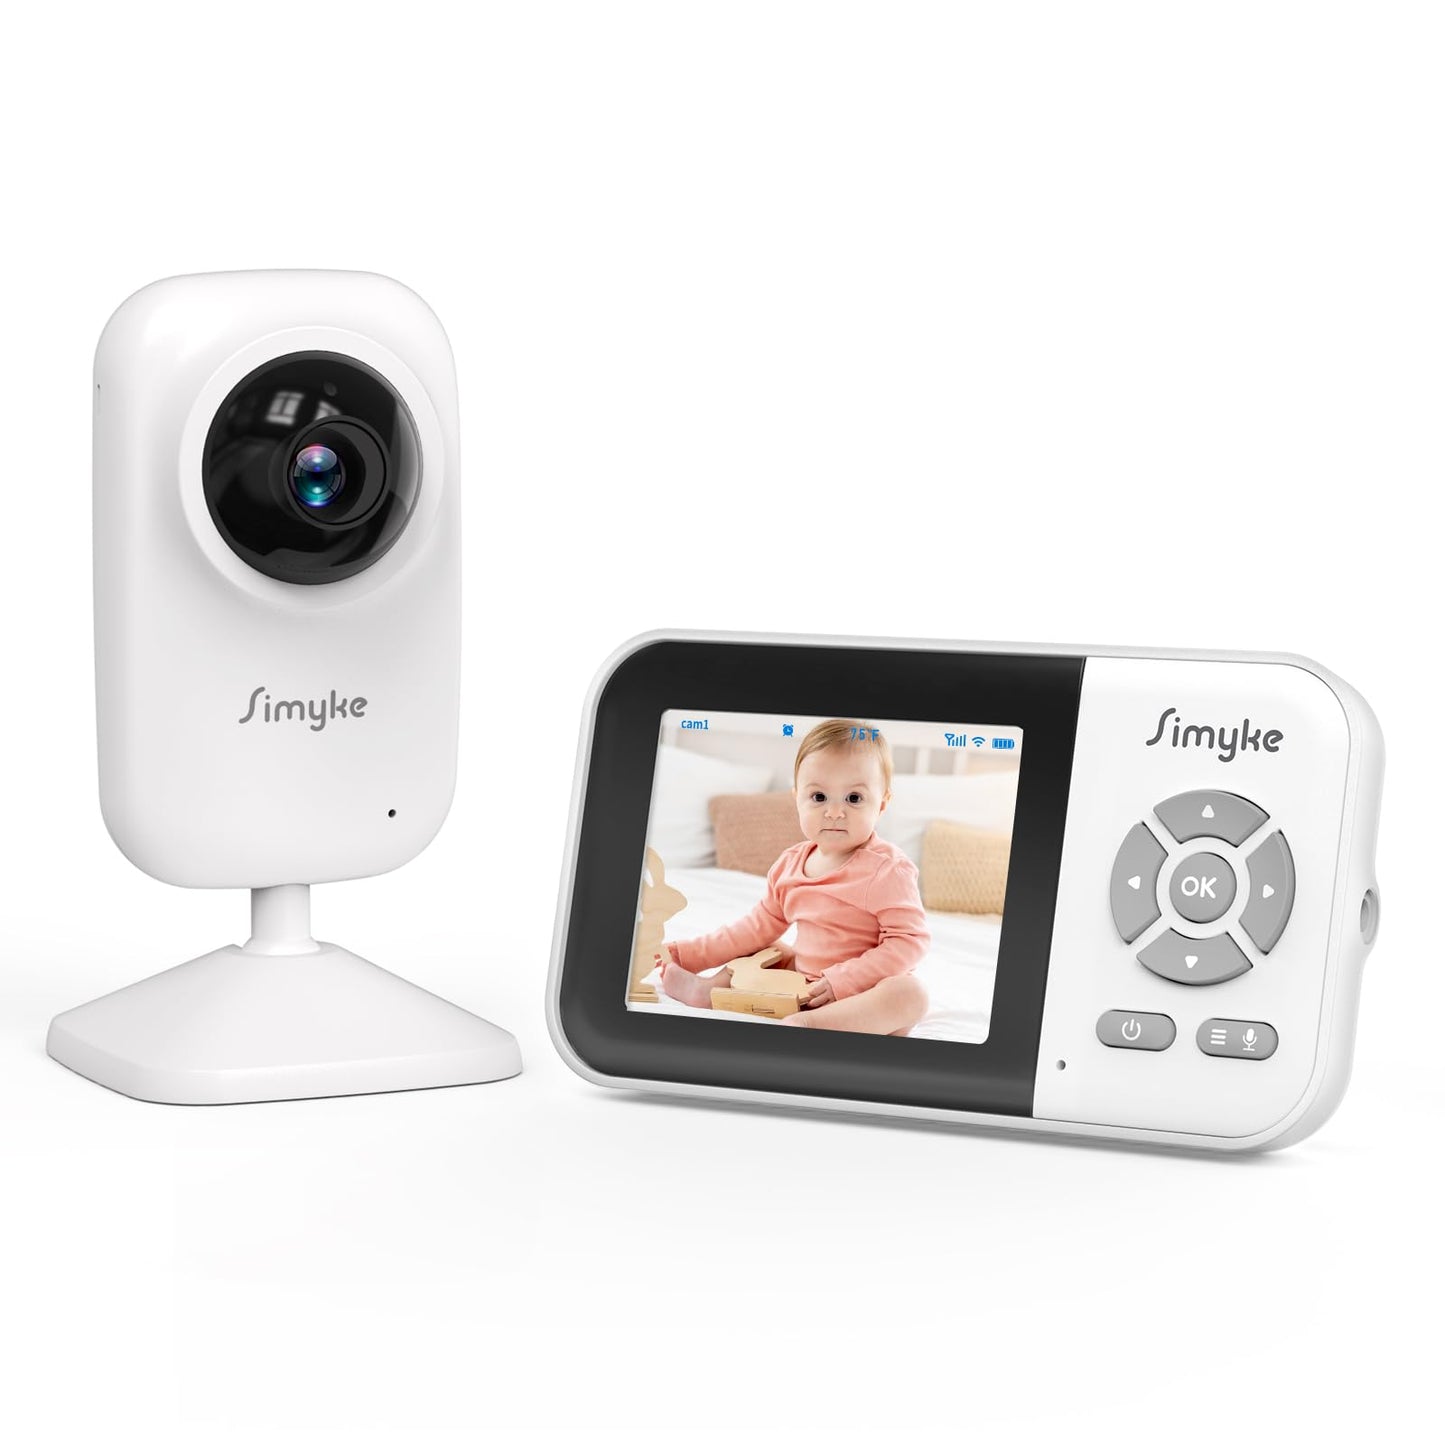 Simyke Upgrate Video Baby Monitor,WiFi Baby Camera,2.8" Display and App Control,1200ft Long Range,2 Way Talk,Auto Night Vision,Sound Alert,VOX,Temperature Sensor 5 Lullabies Feeding Remind,Home Use